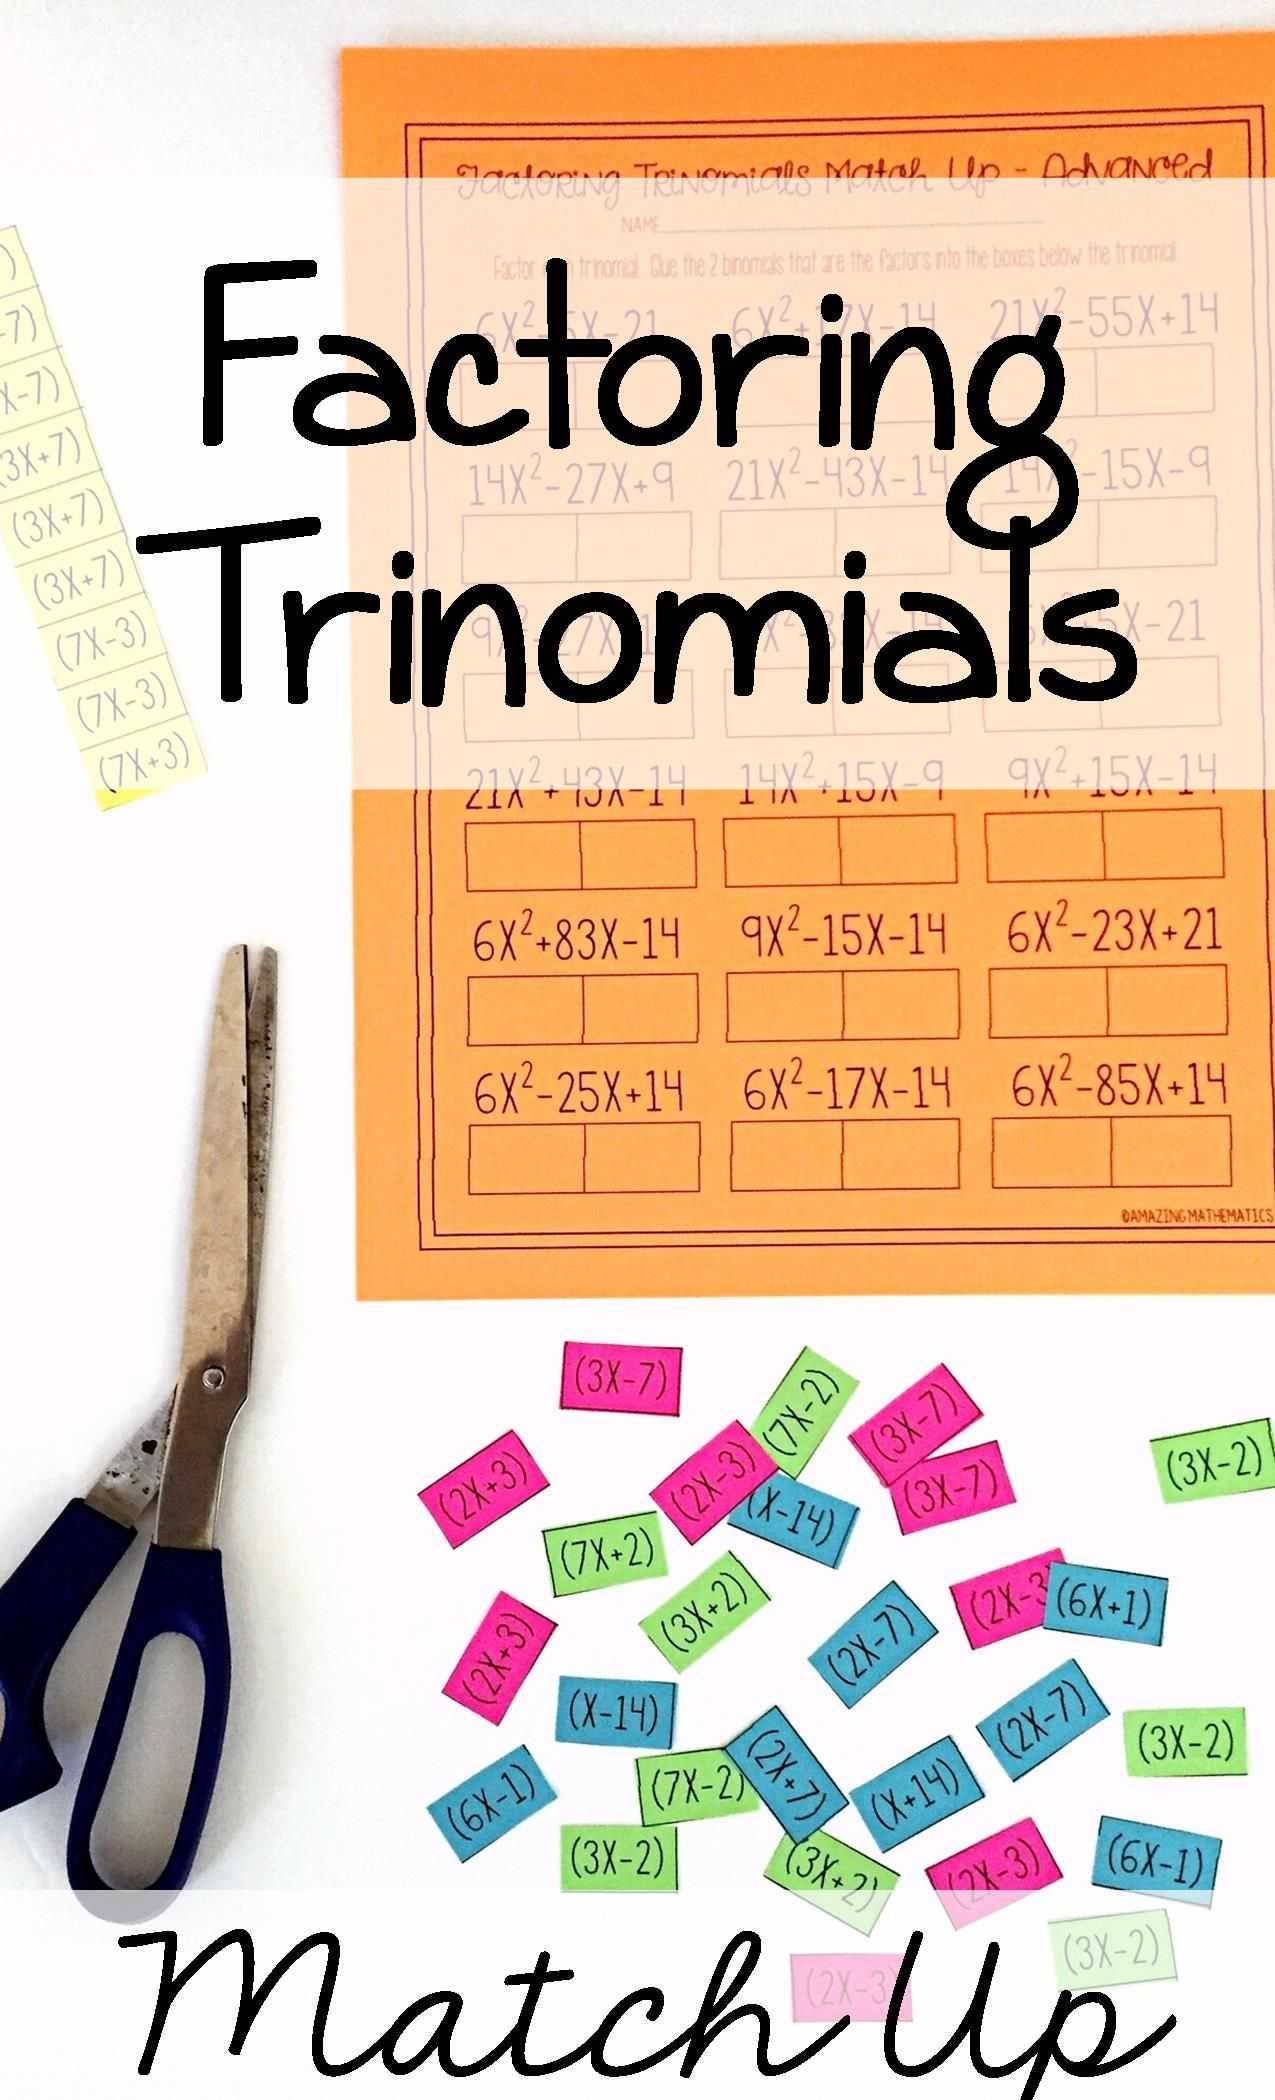 Transformation Practice Worksheet or Factoring Polynomials Activity Advanced Pinterest